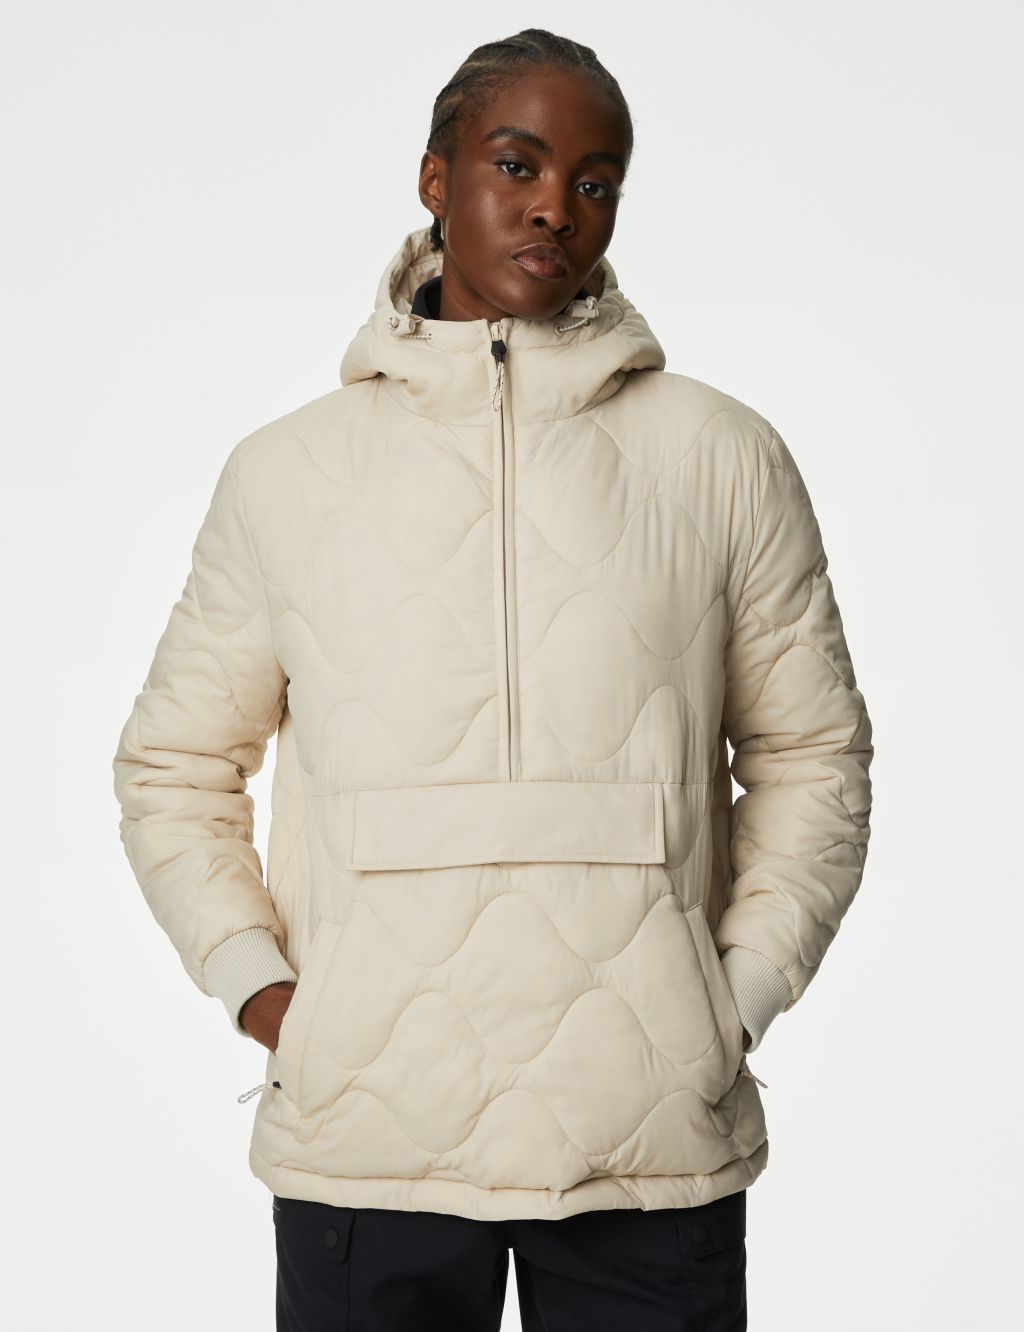 Women's Puffer Jackets, Quilted & Padded Coats